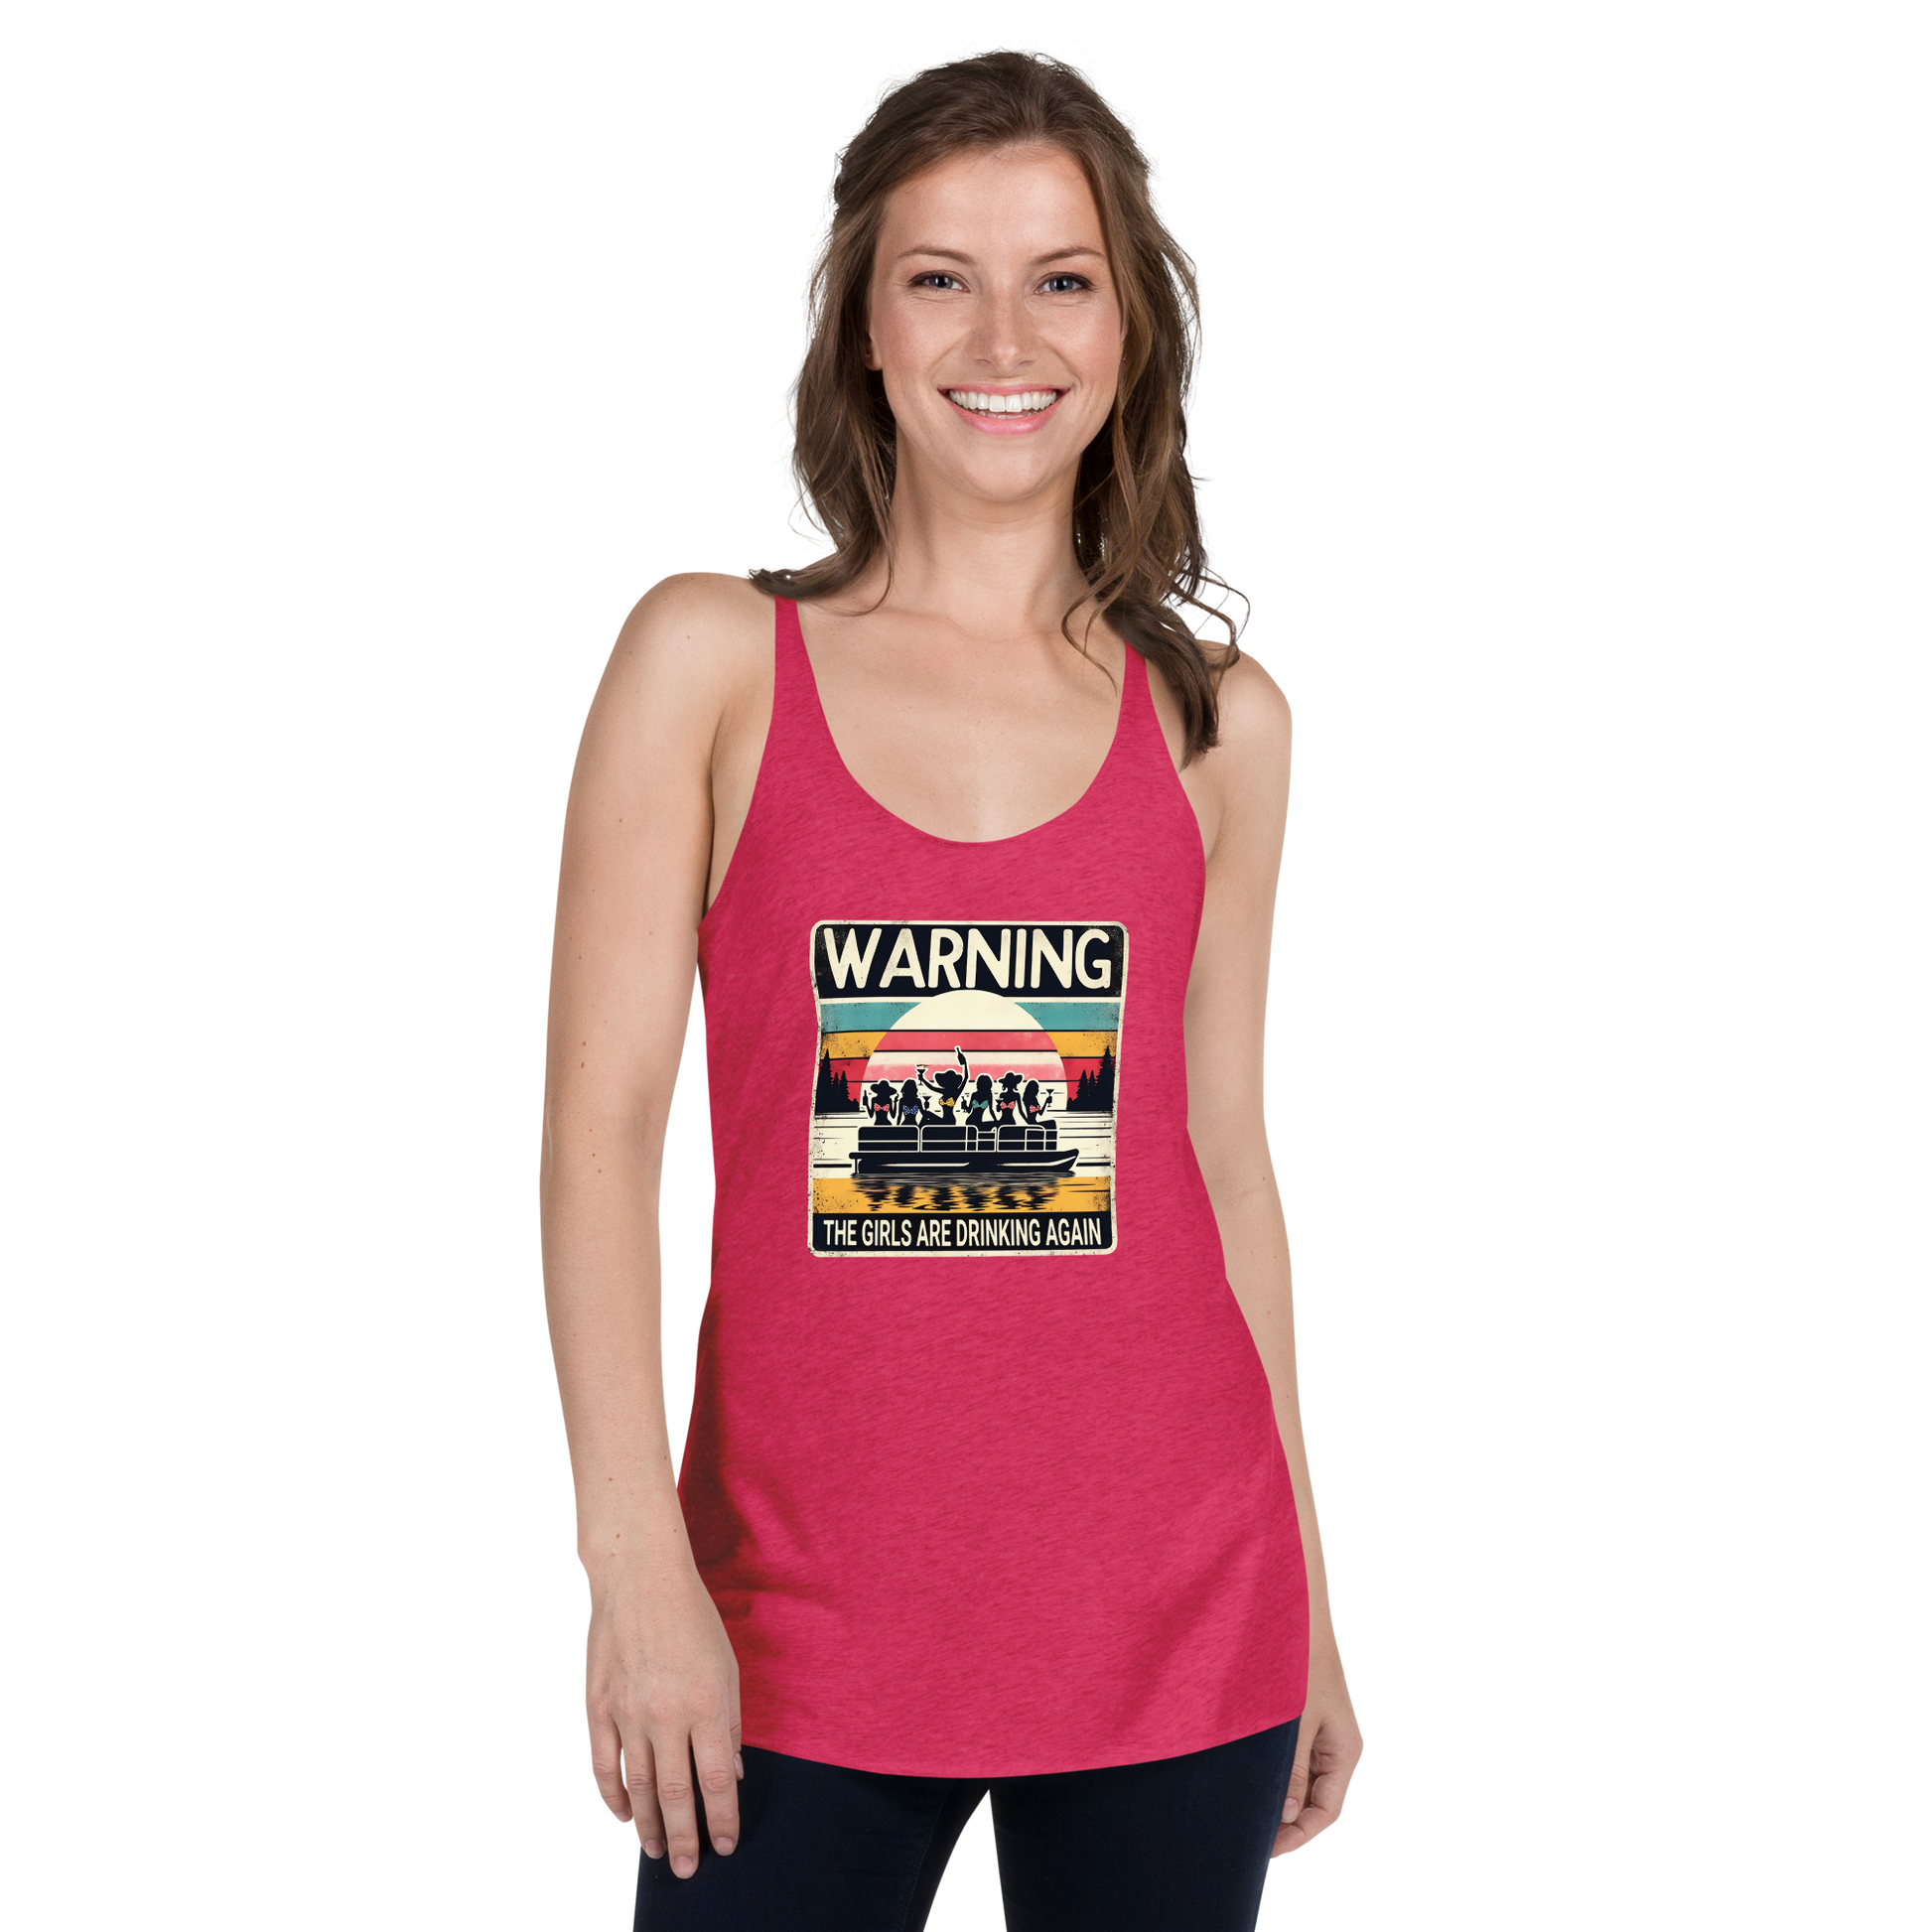 Racerback tank featuring "Warning: The Girls Are Drinking Again" with an illustration of girls drinking on a pontoon boat at sunset.